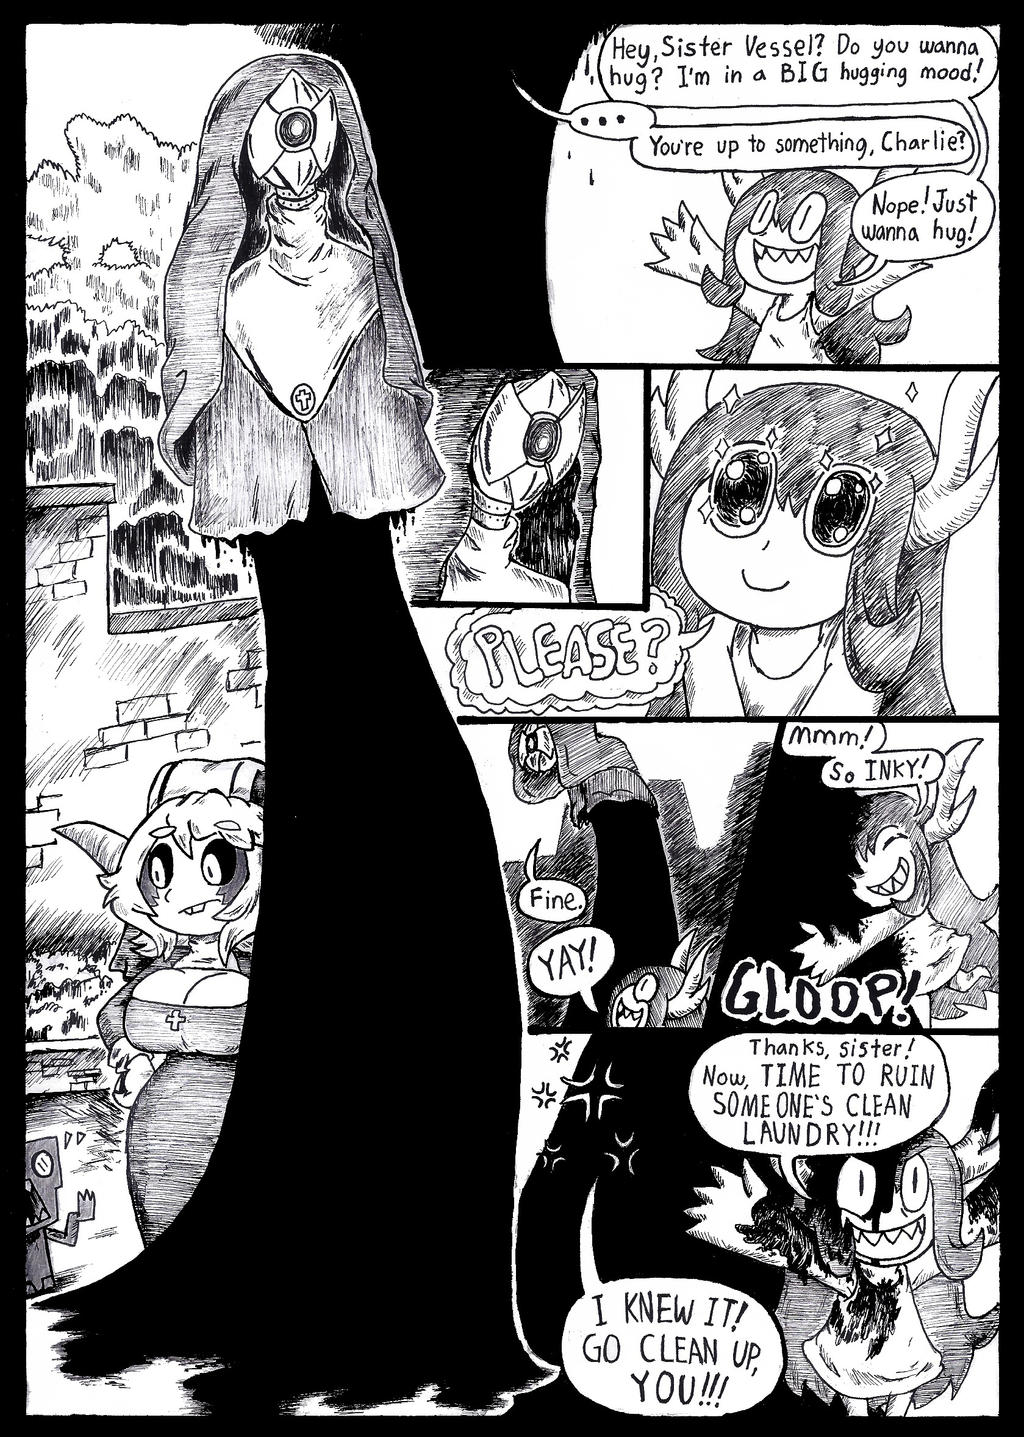 Back to School - Chapter 1 - Page 4 by PlayboyVampire on DeviantArt